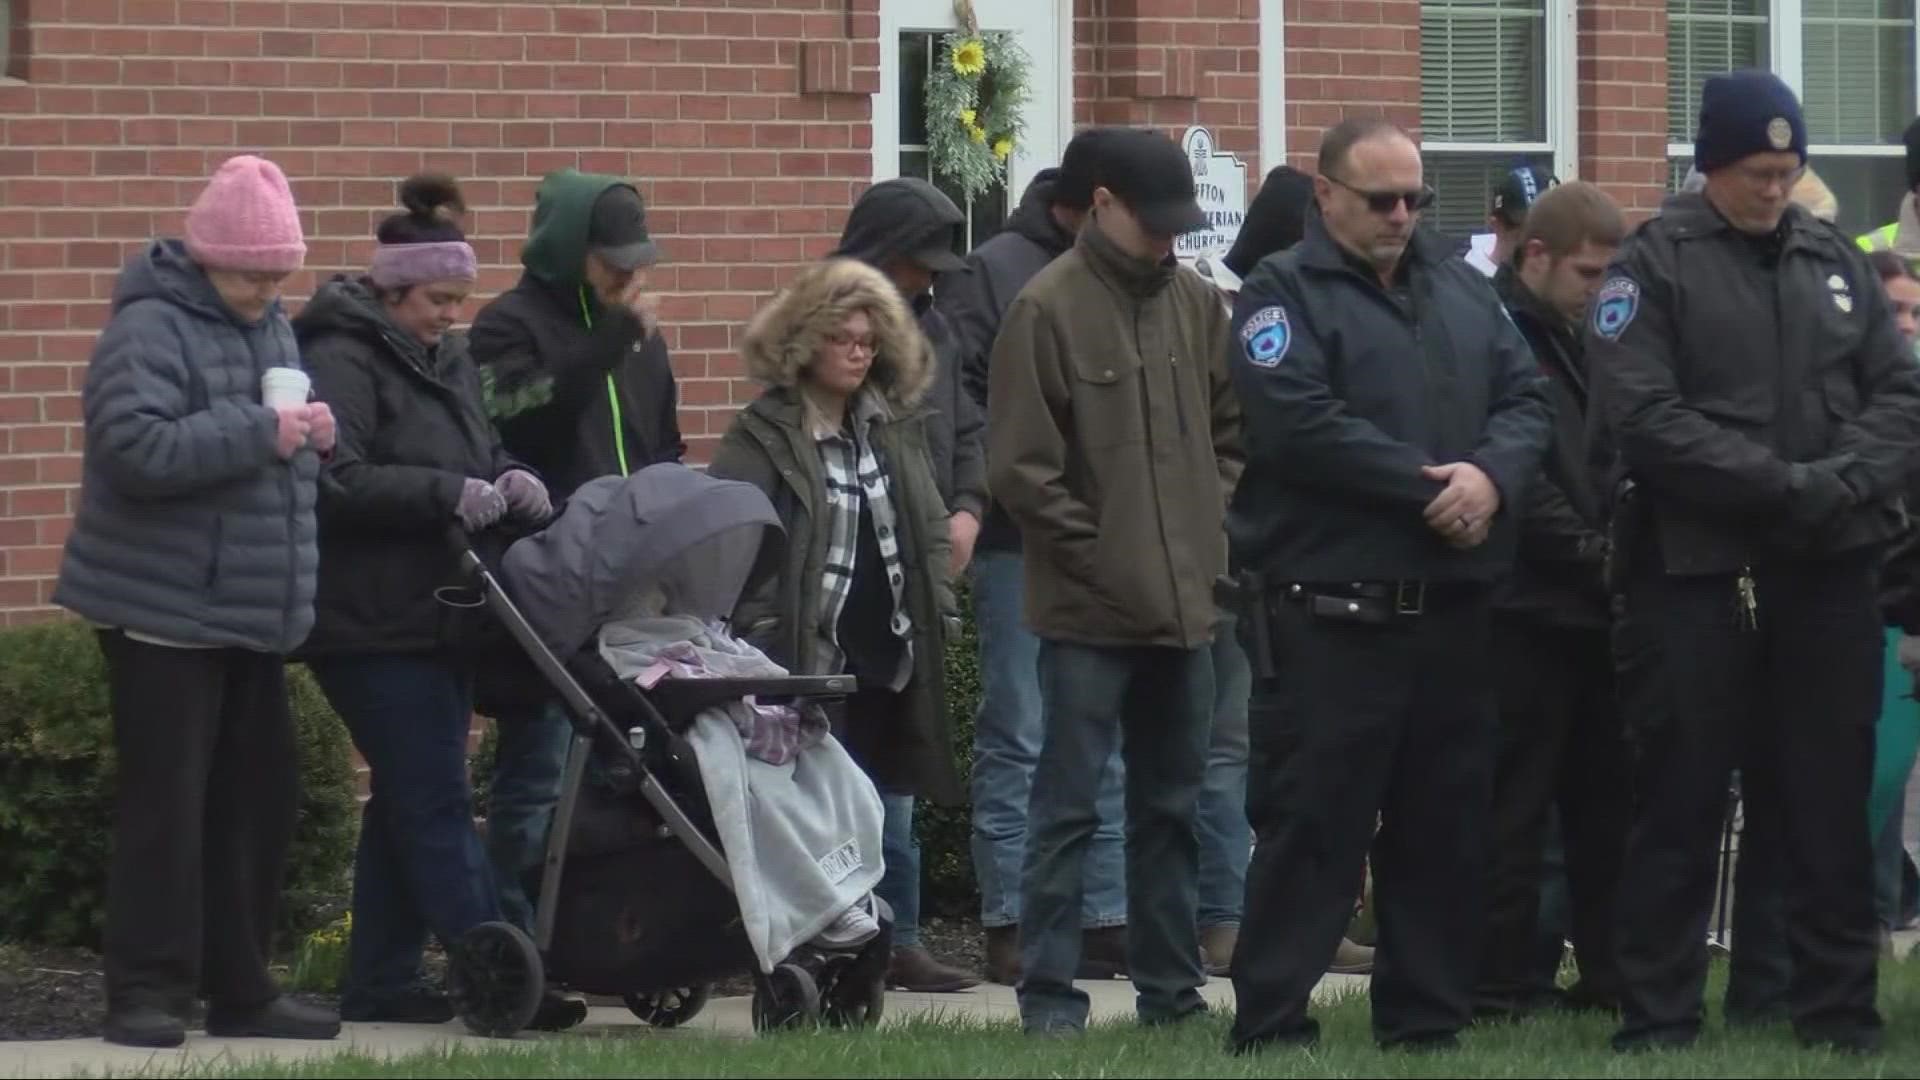 Loved ones held a vigil for Bluffton police officer Dominic Francis, who was killed on Thursday. We've also learned more about the suspects involved.